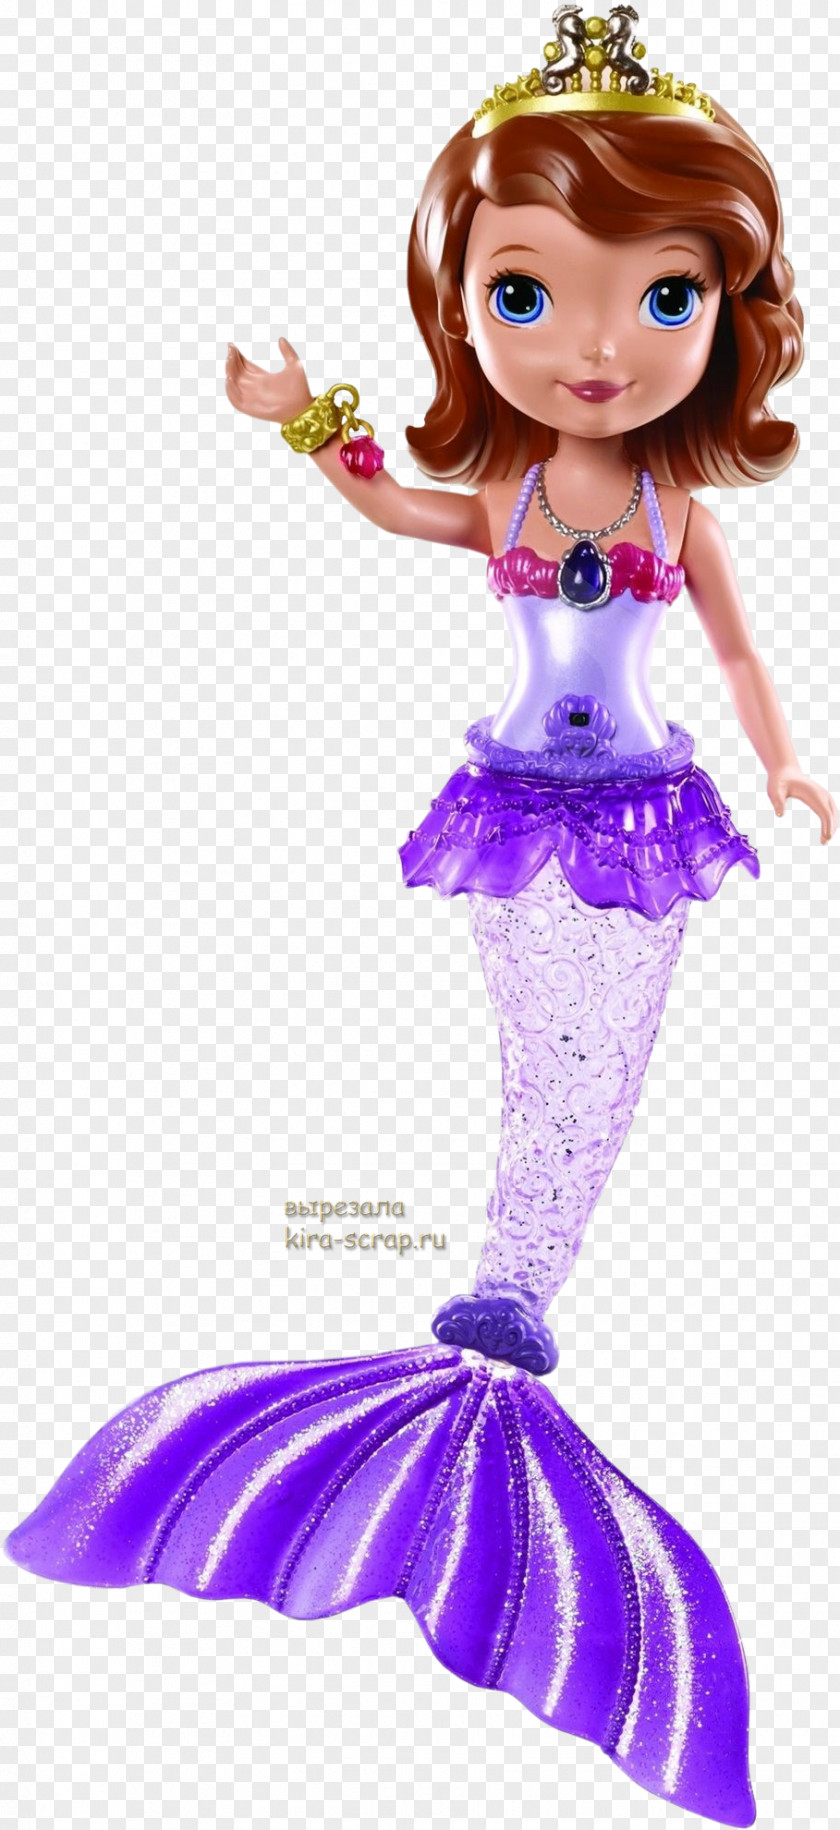 Sofia The First Amazon.com Doll Toy Mermaid PNG